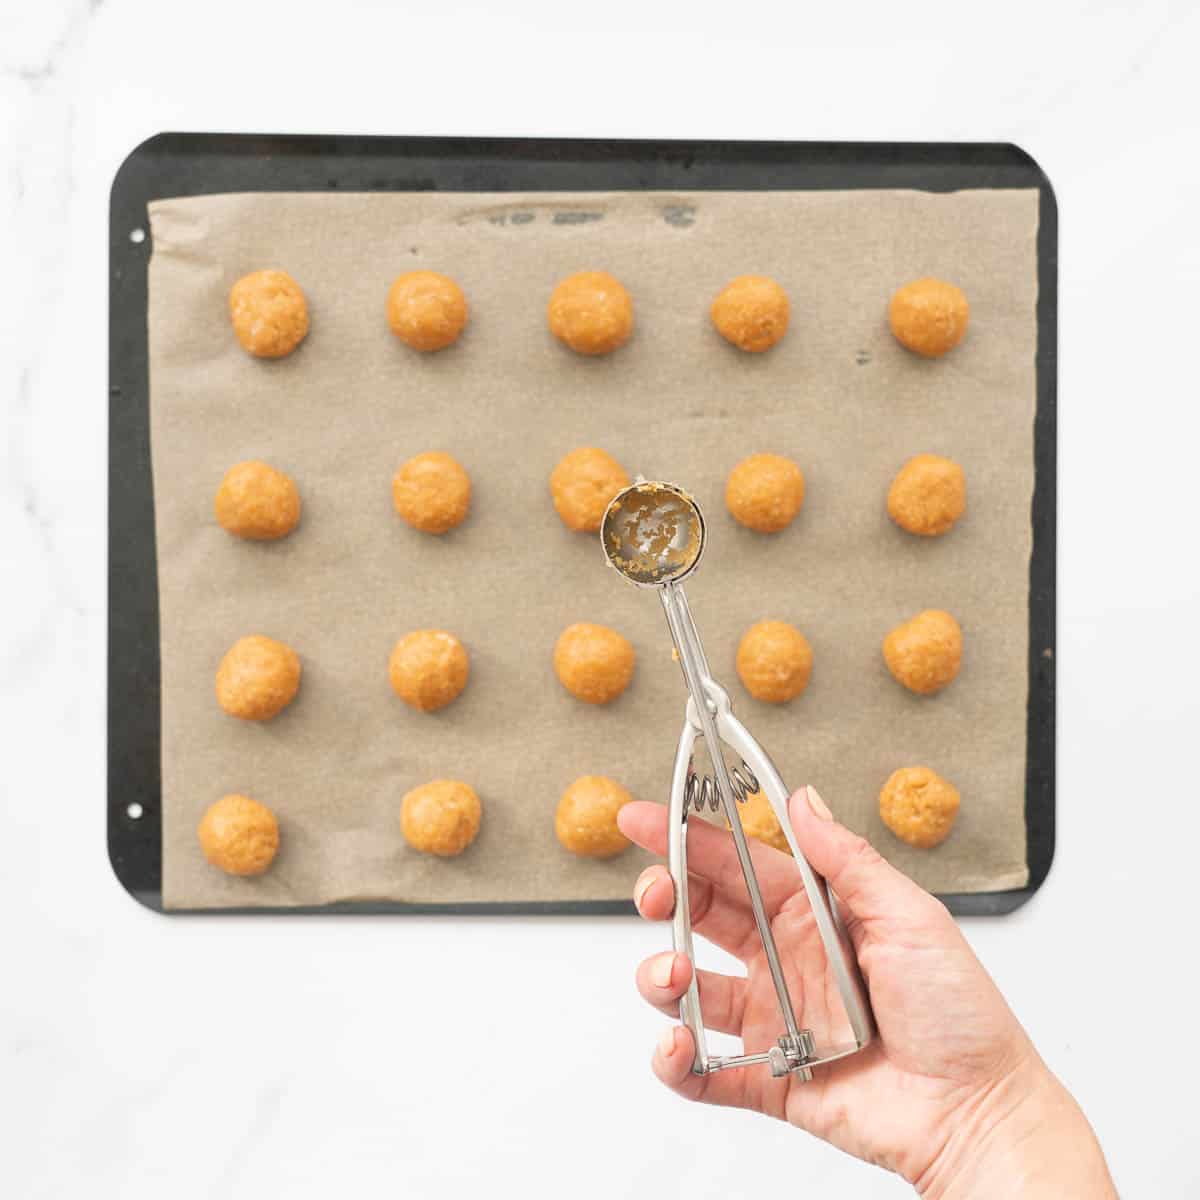 A cookie scoop held above a baking tray of cookie dough balls ready to be pressed. 